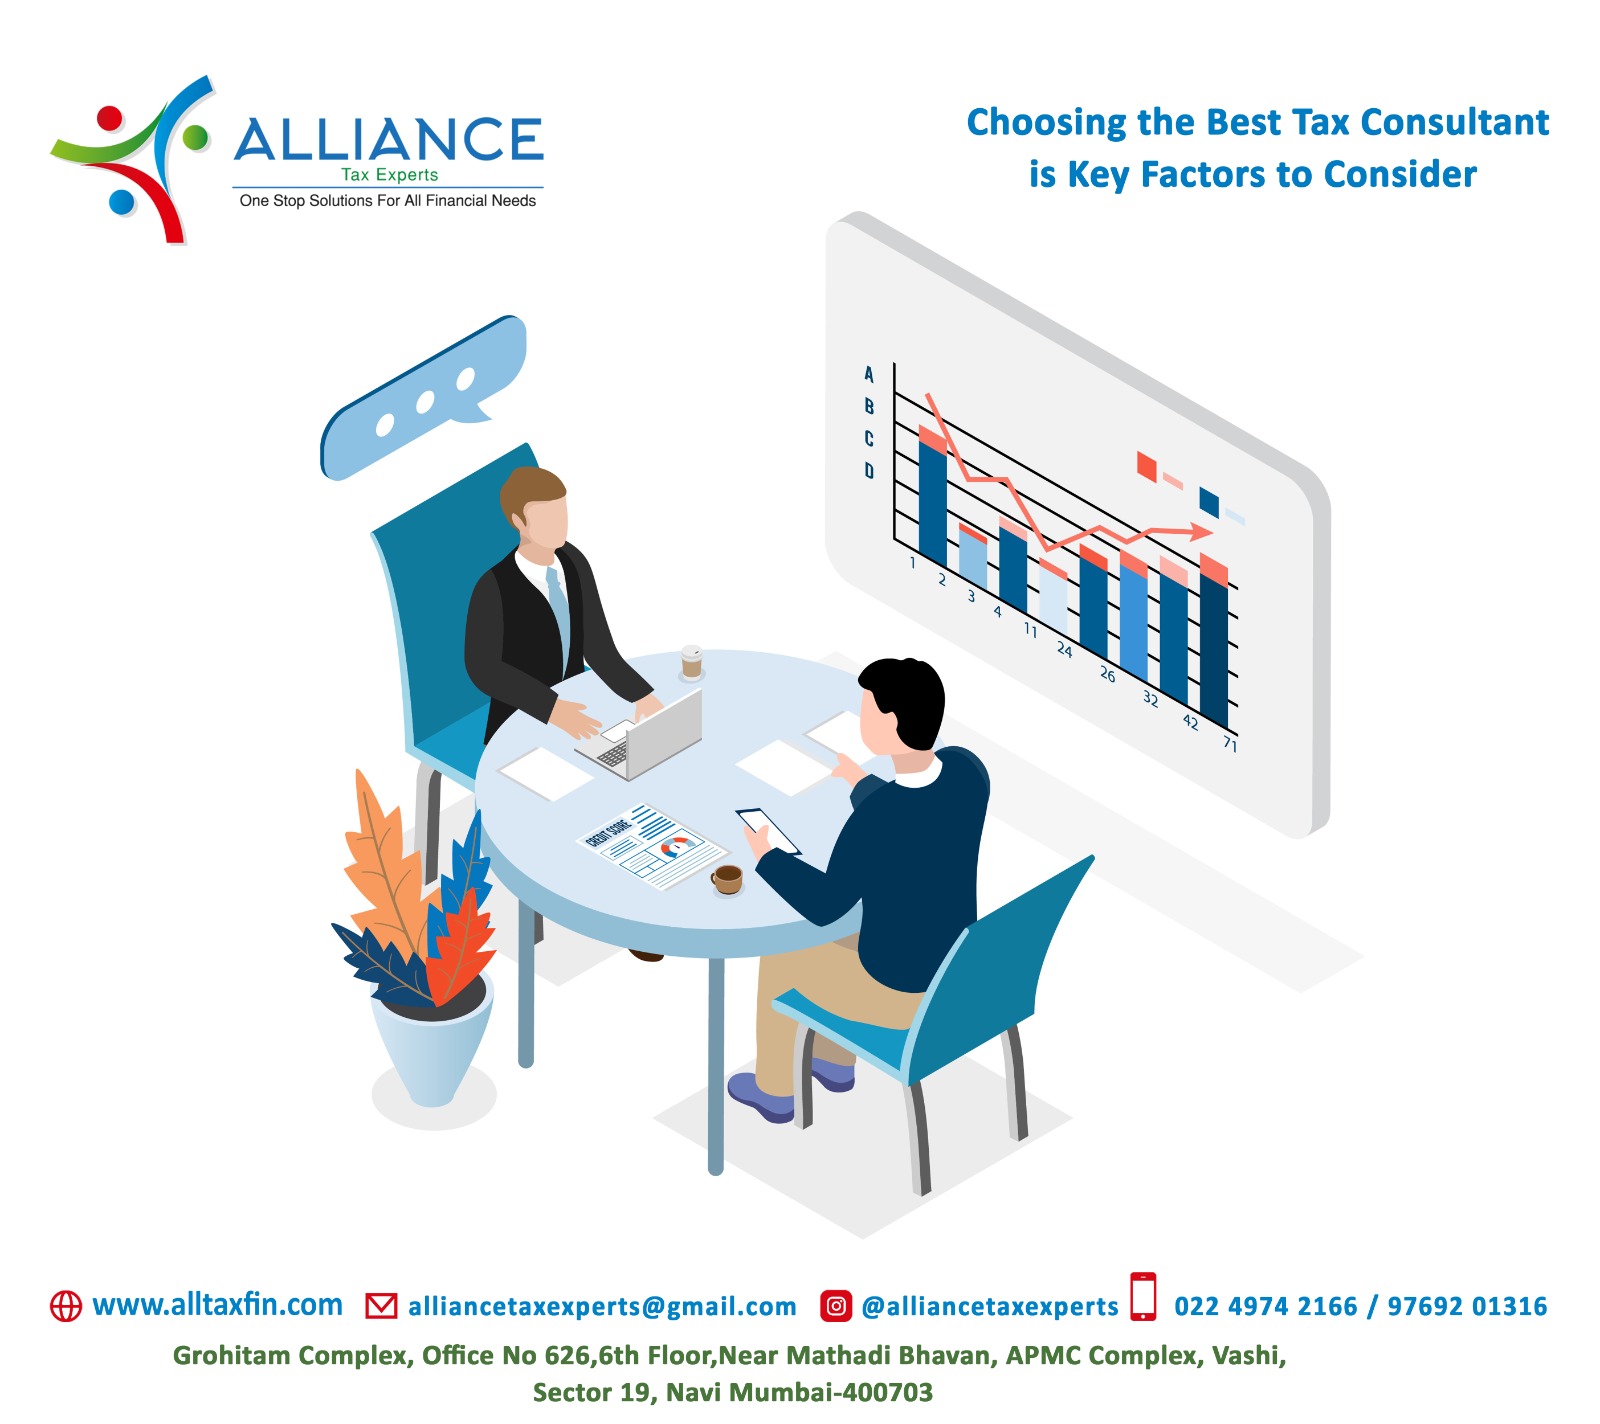 Alliance Tax Experts Choosing The Best Tax Consultant For Your Business Key Factors To Consider 5295